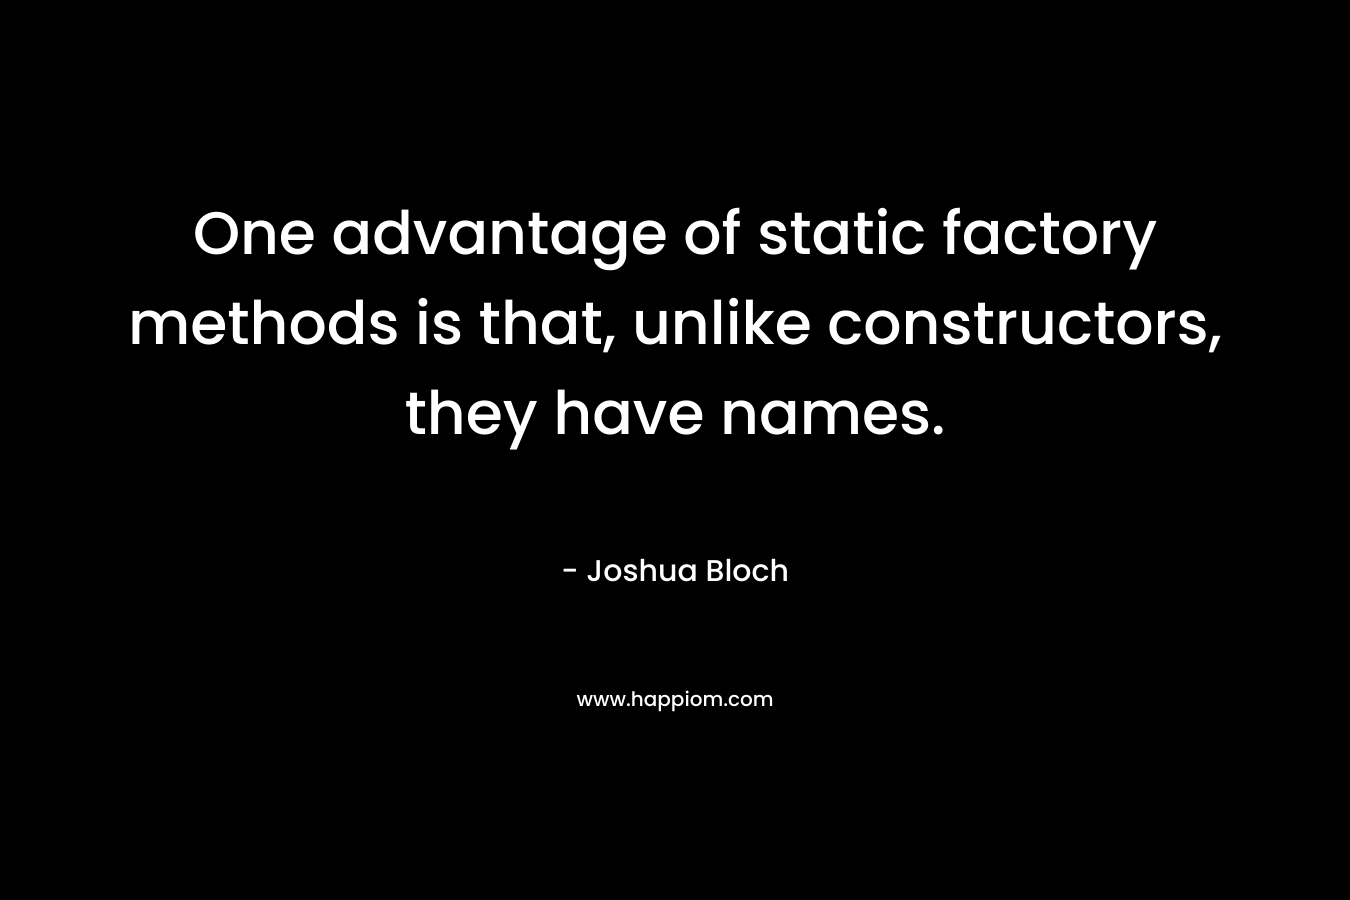 One advantage of static factory methods is that, unlike constructors, they have names. – Joshua Bloch